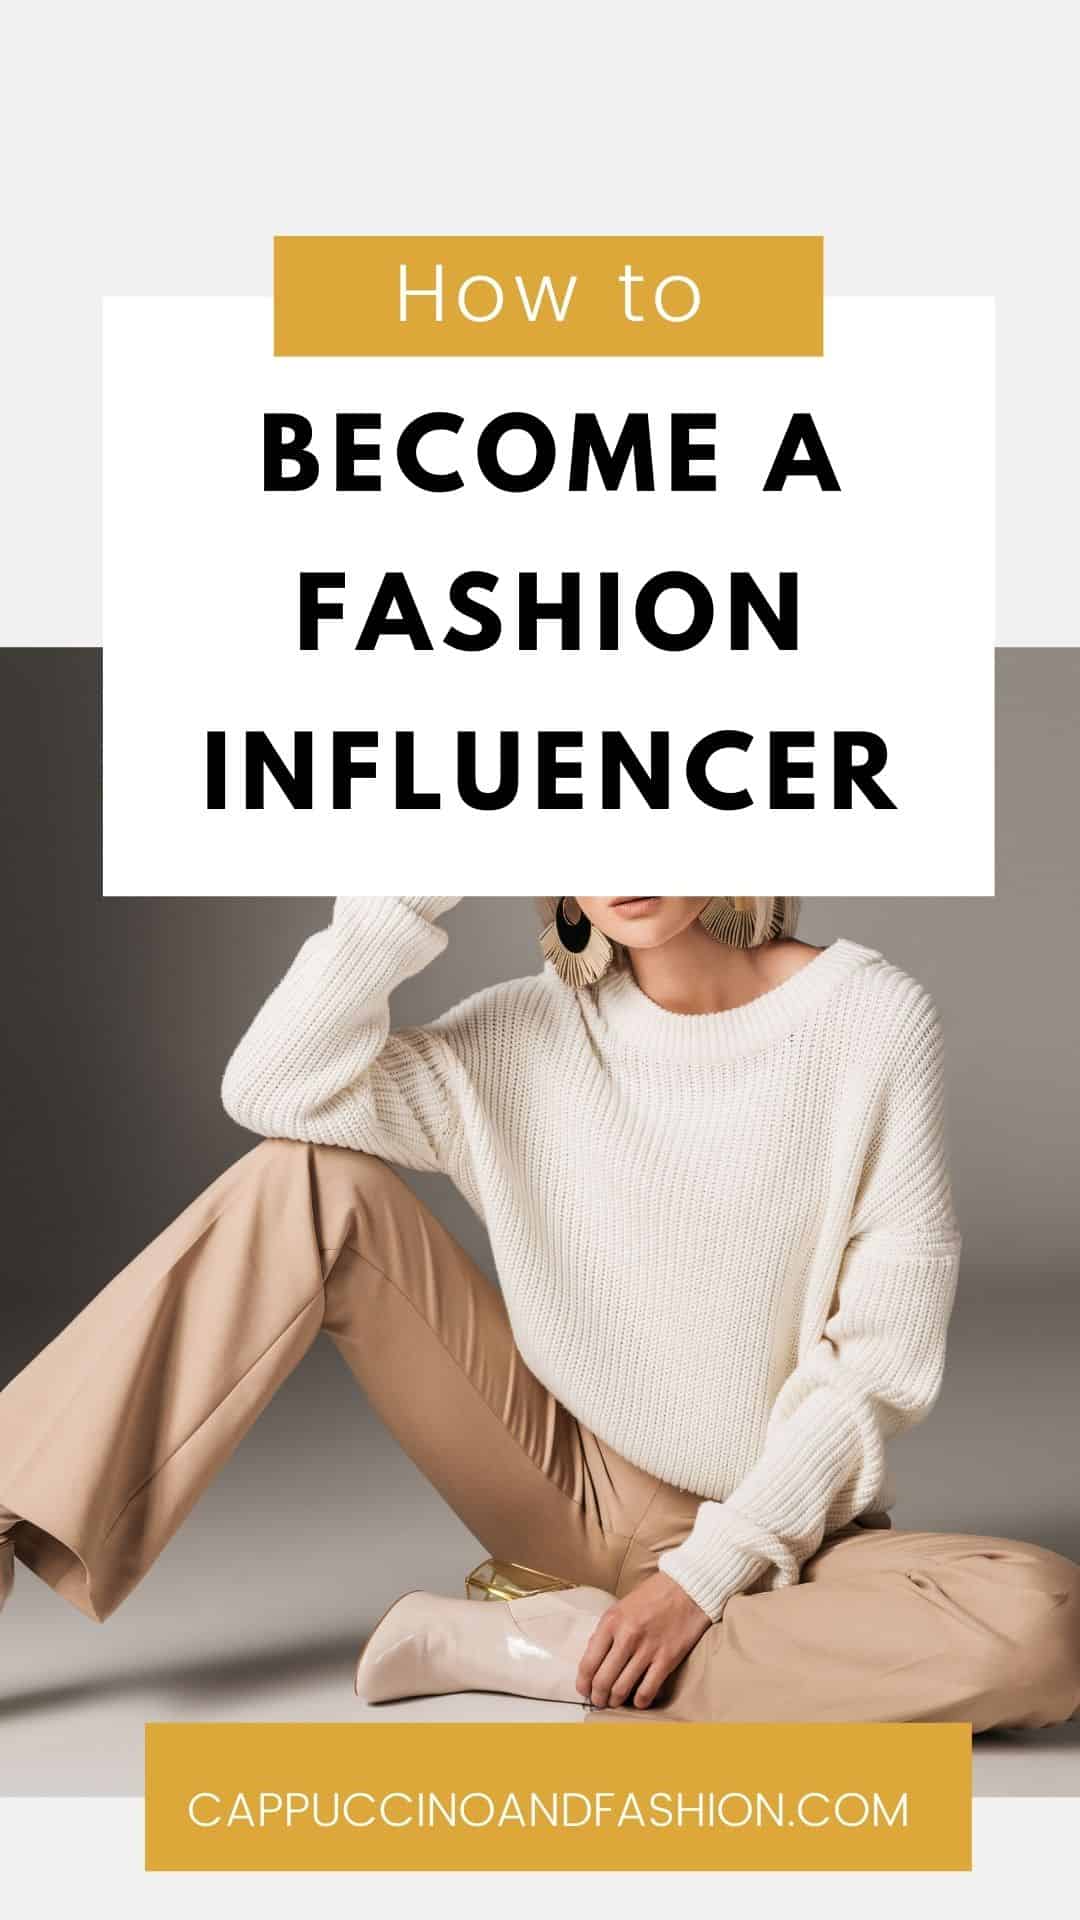 How to become a fashion influencer or blogger